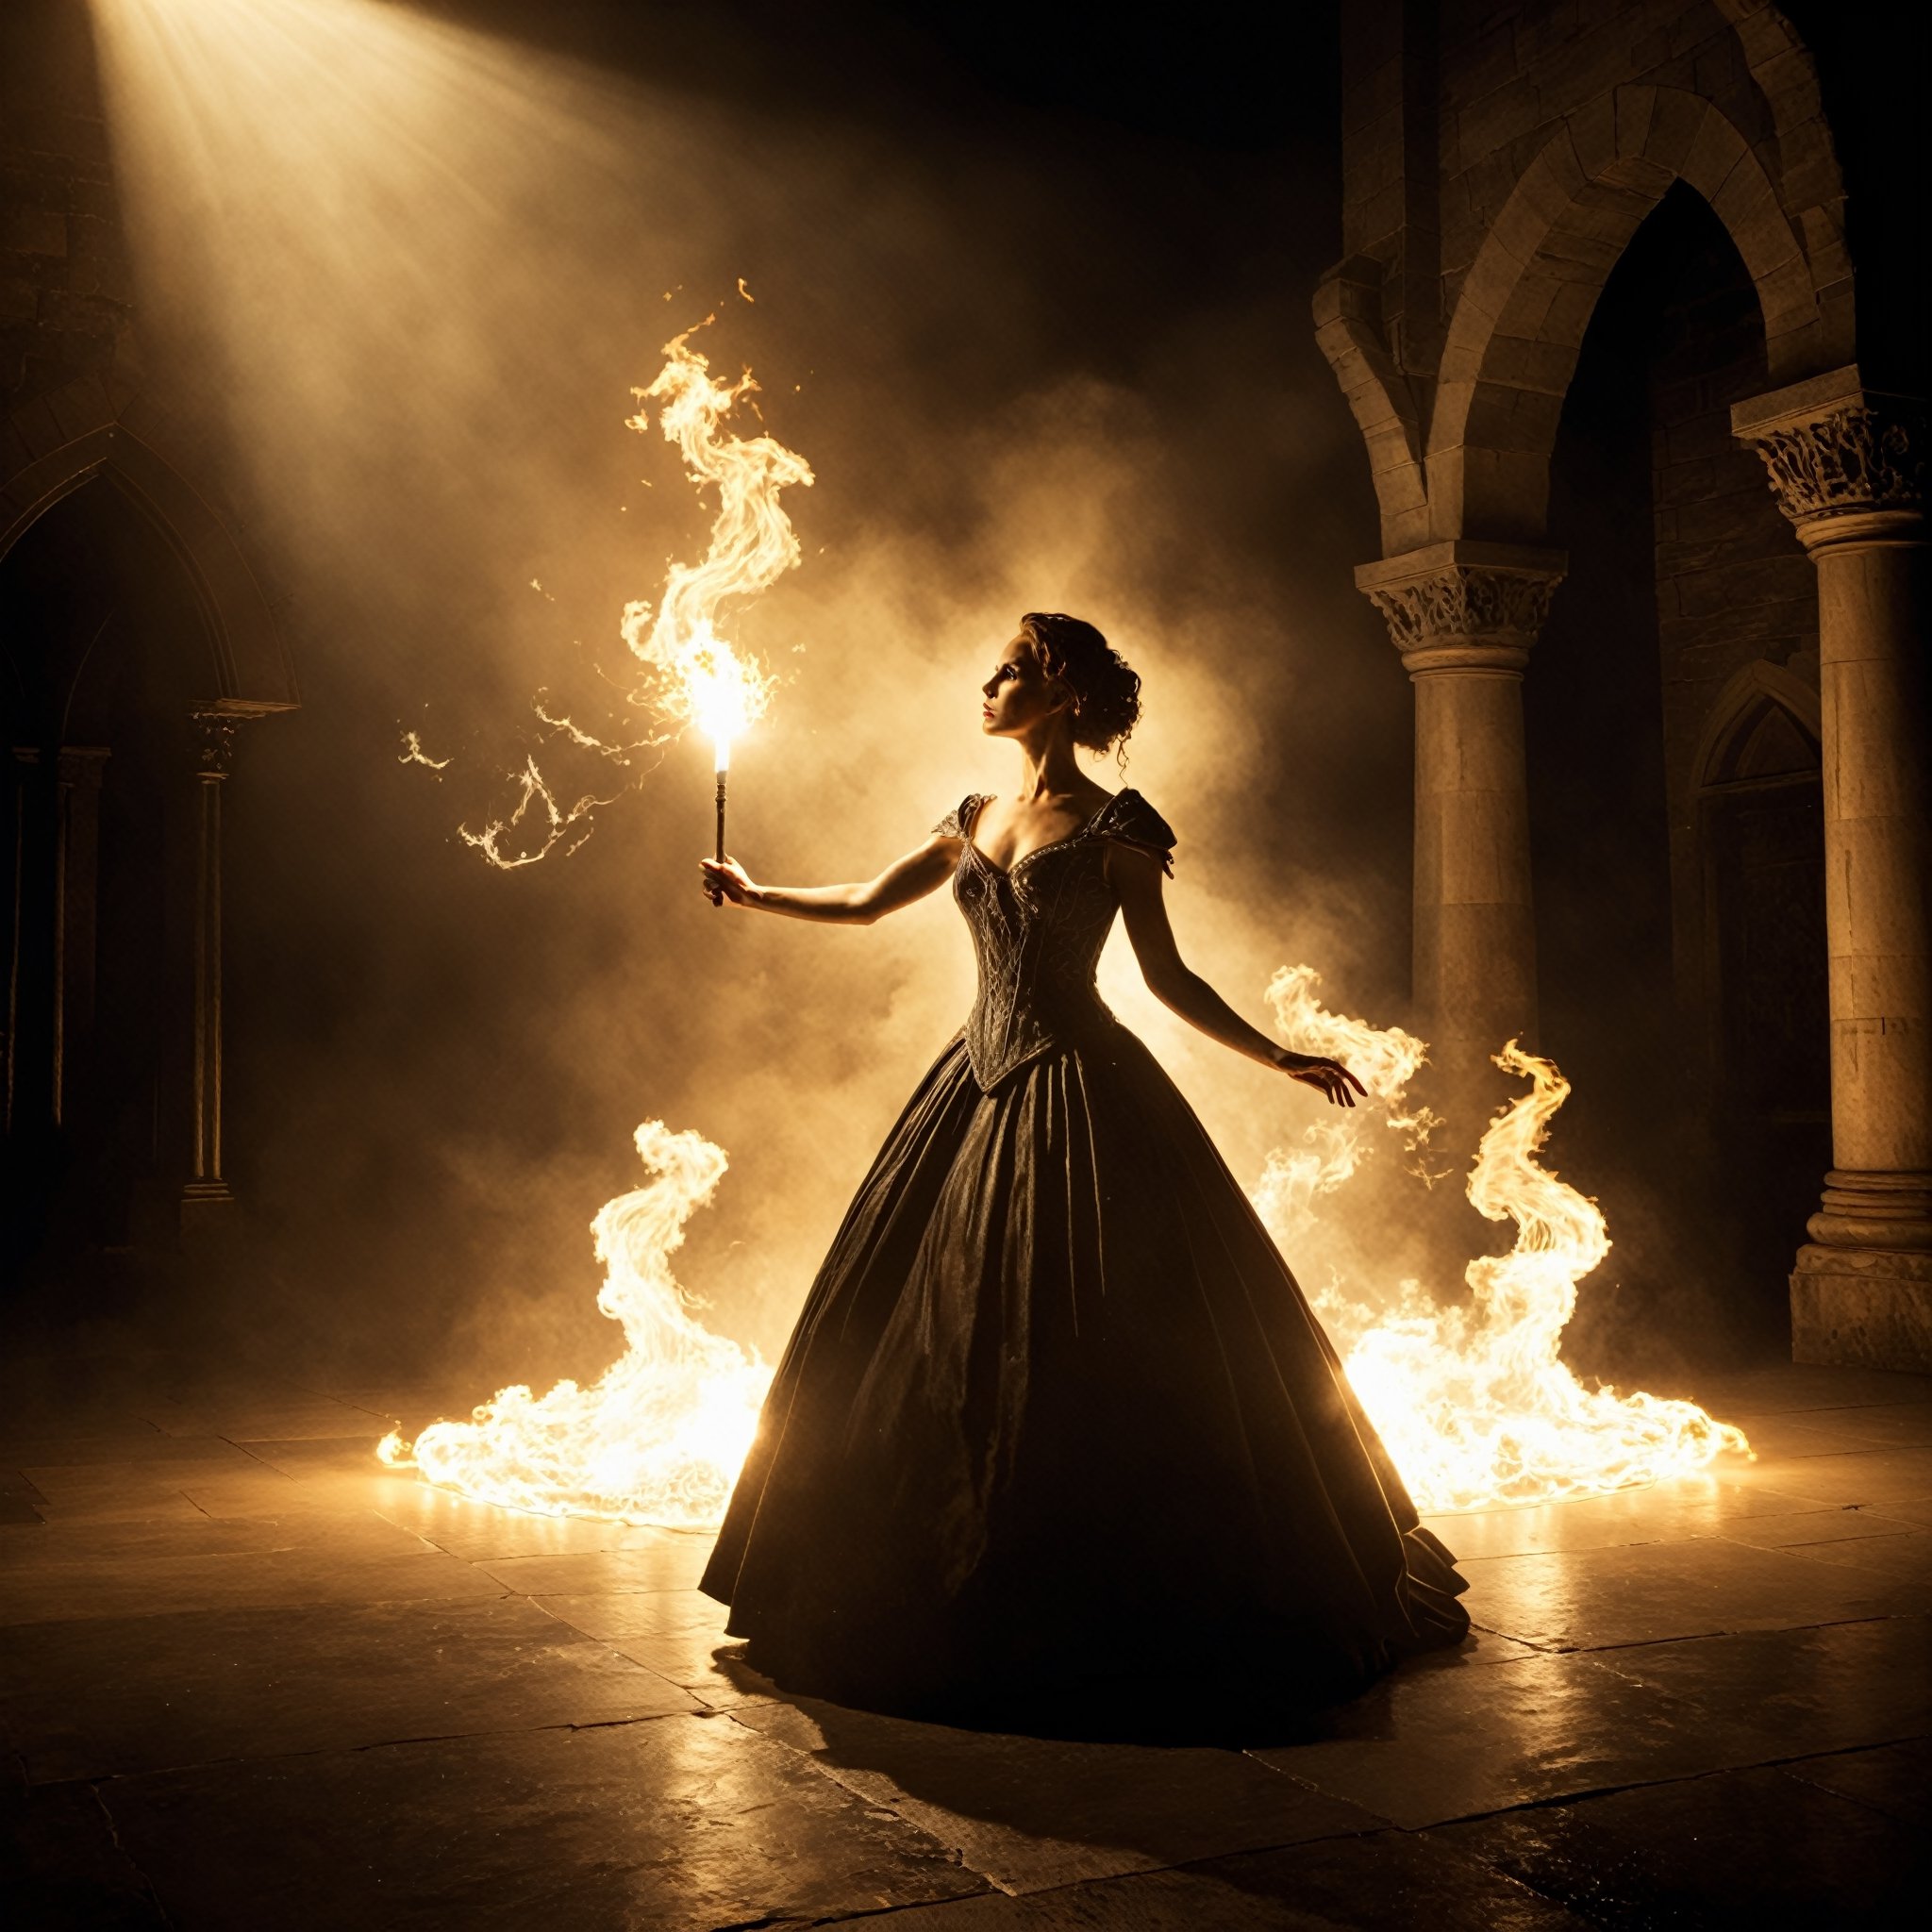 dramatic shot depicting it's a kind of magic, dramatic lighting, moment of high drama, thematic setting
